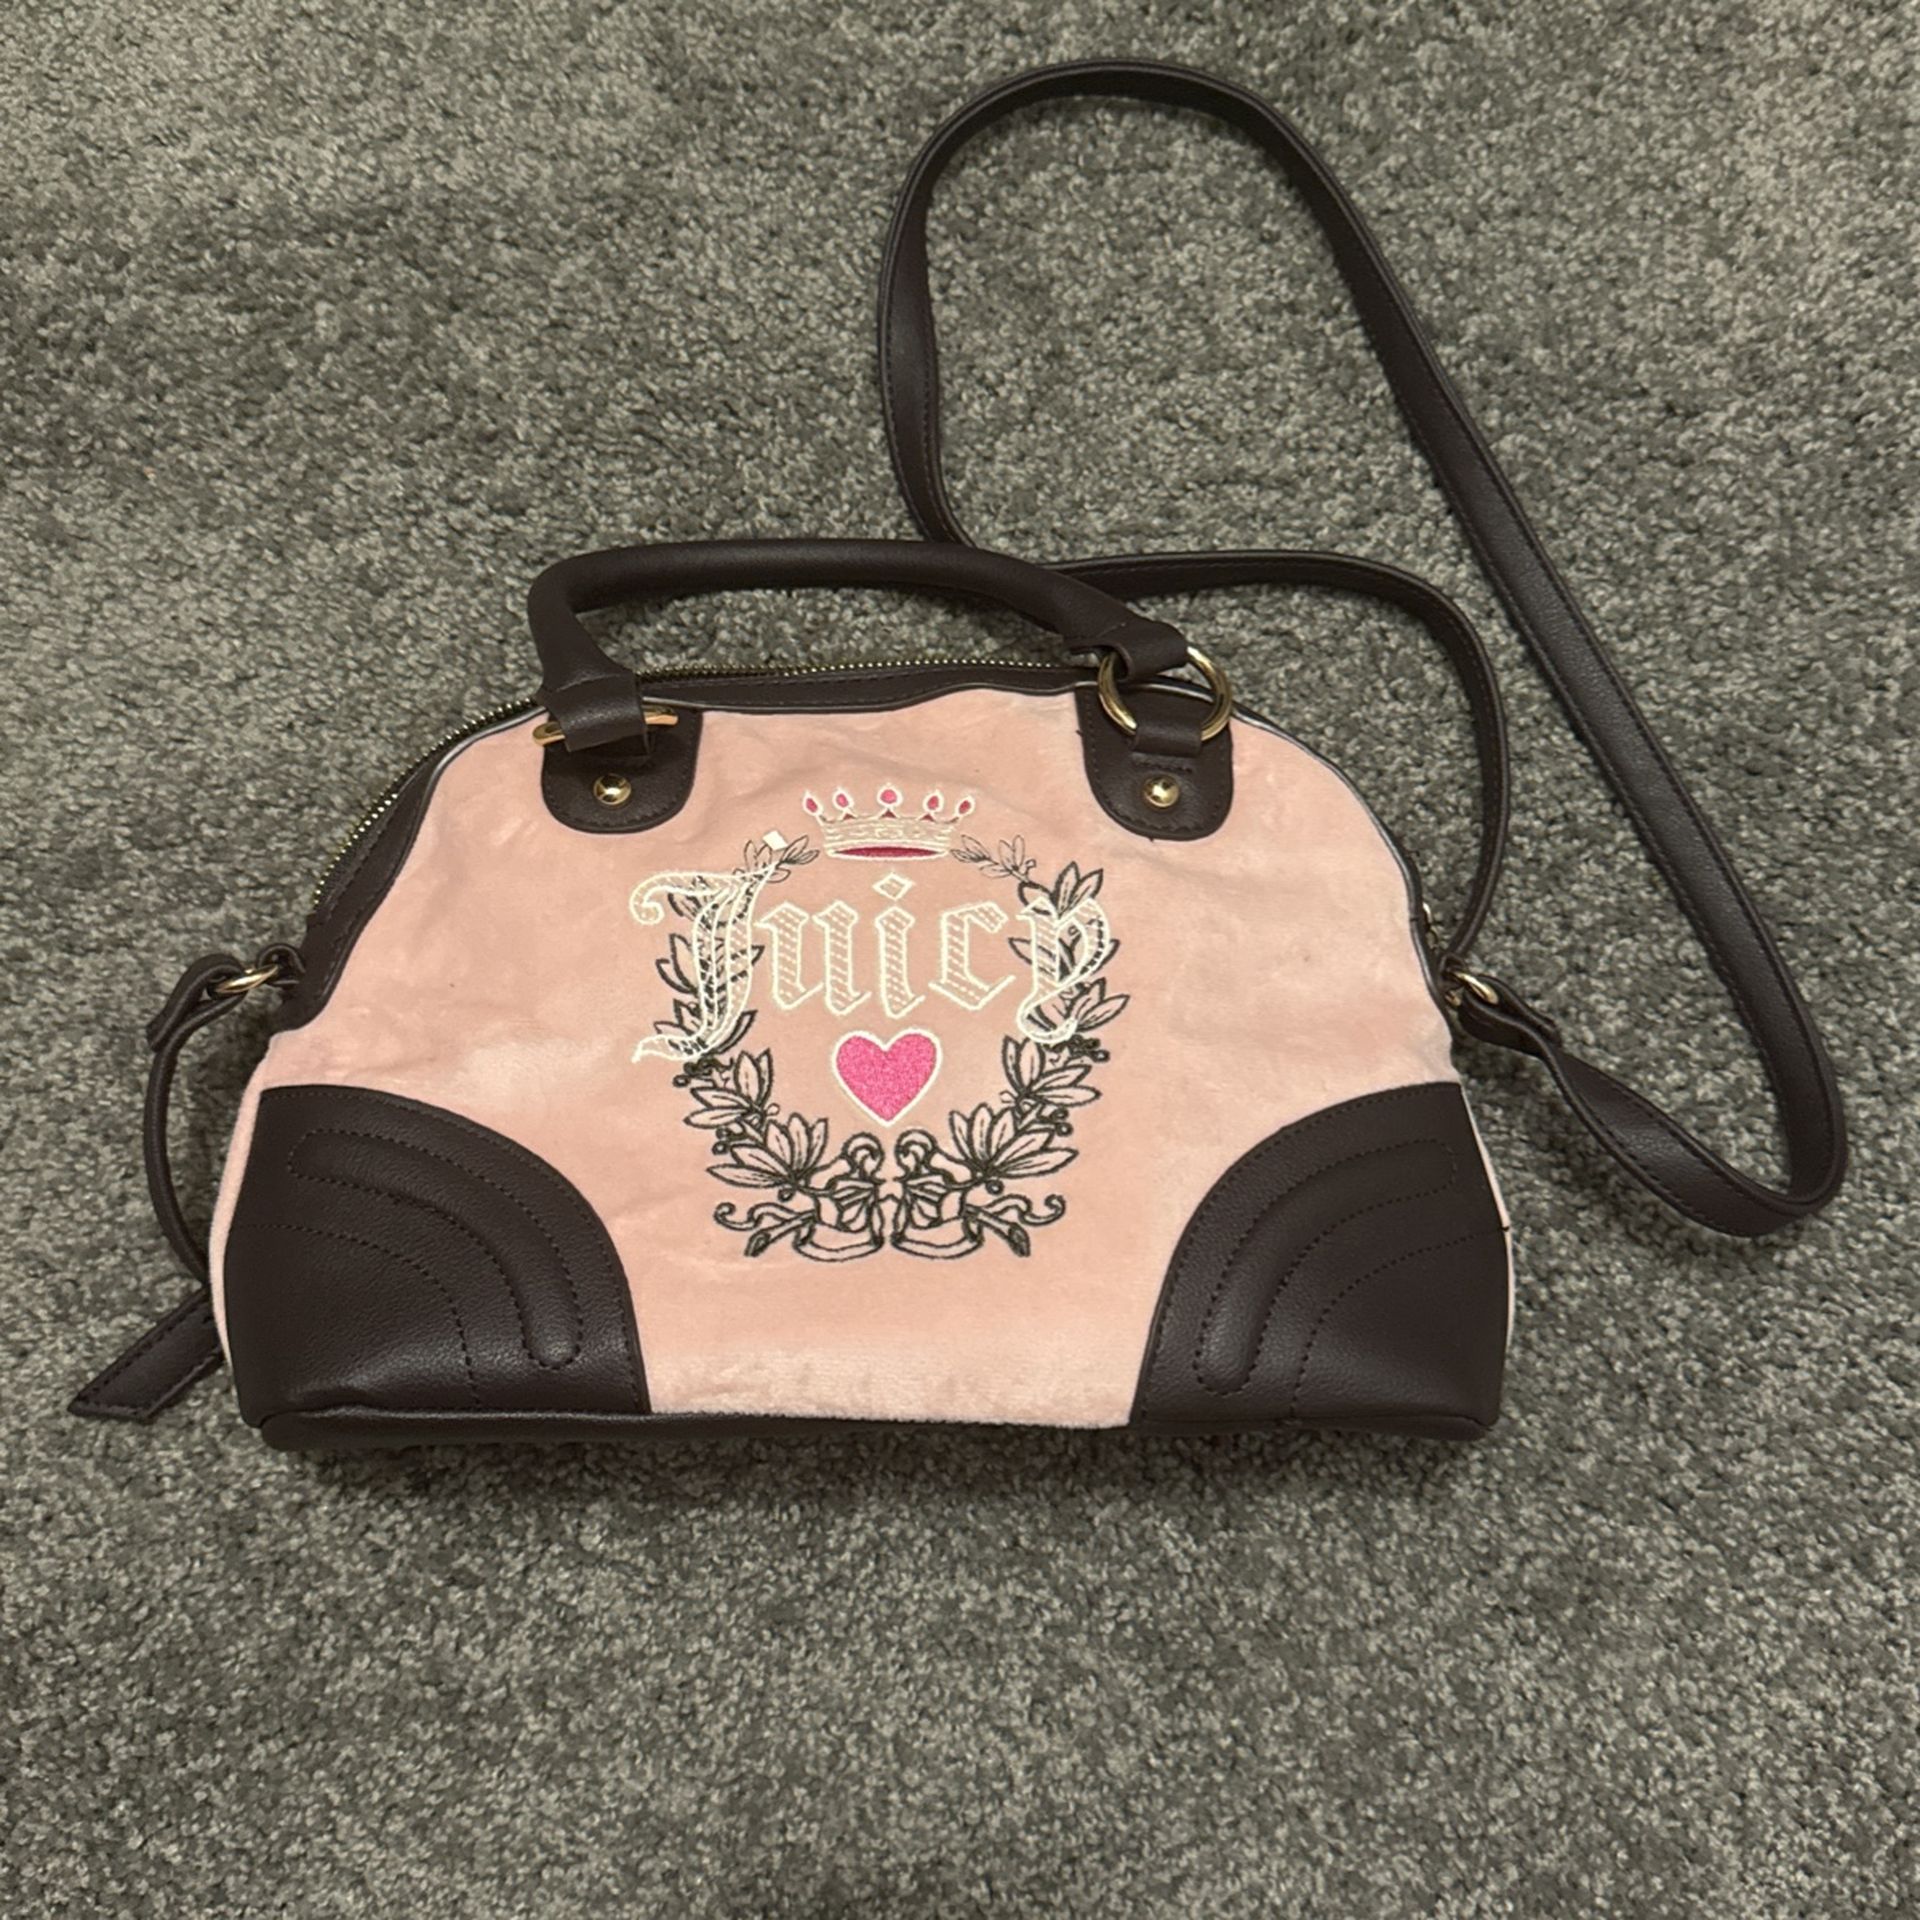 Juicy Couture purse